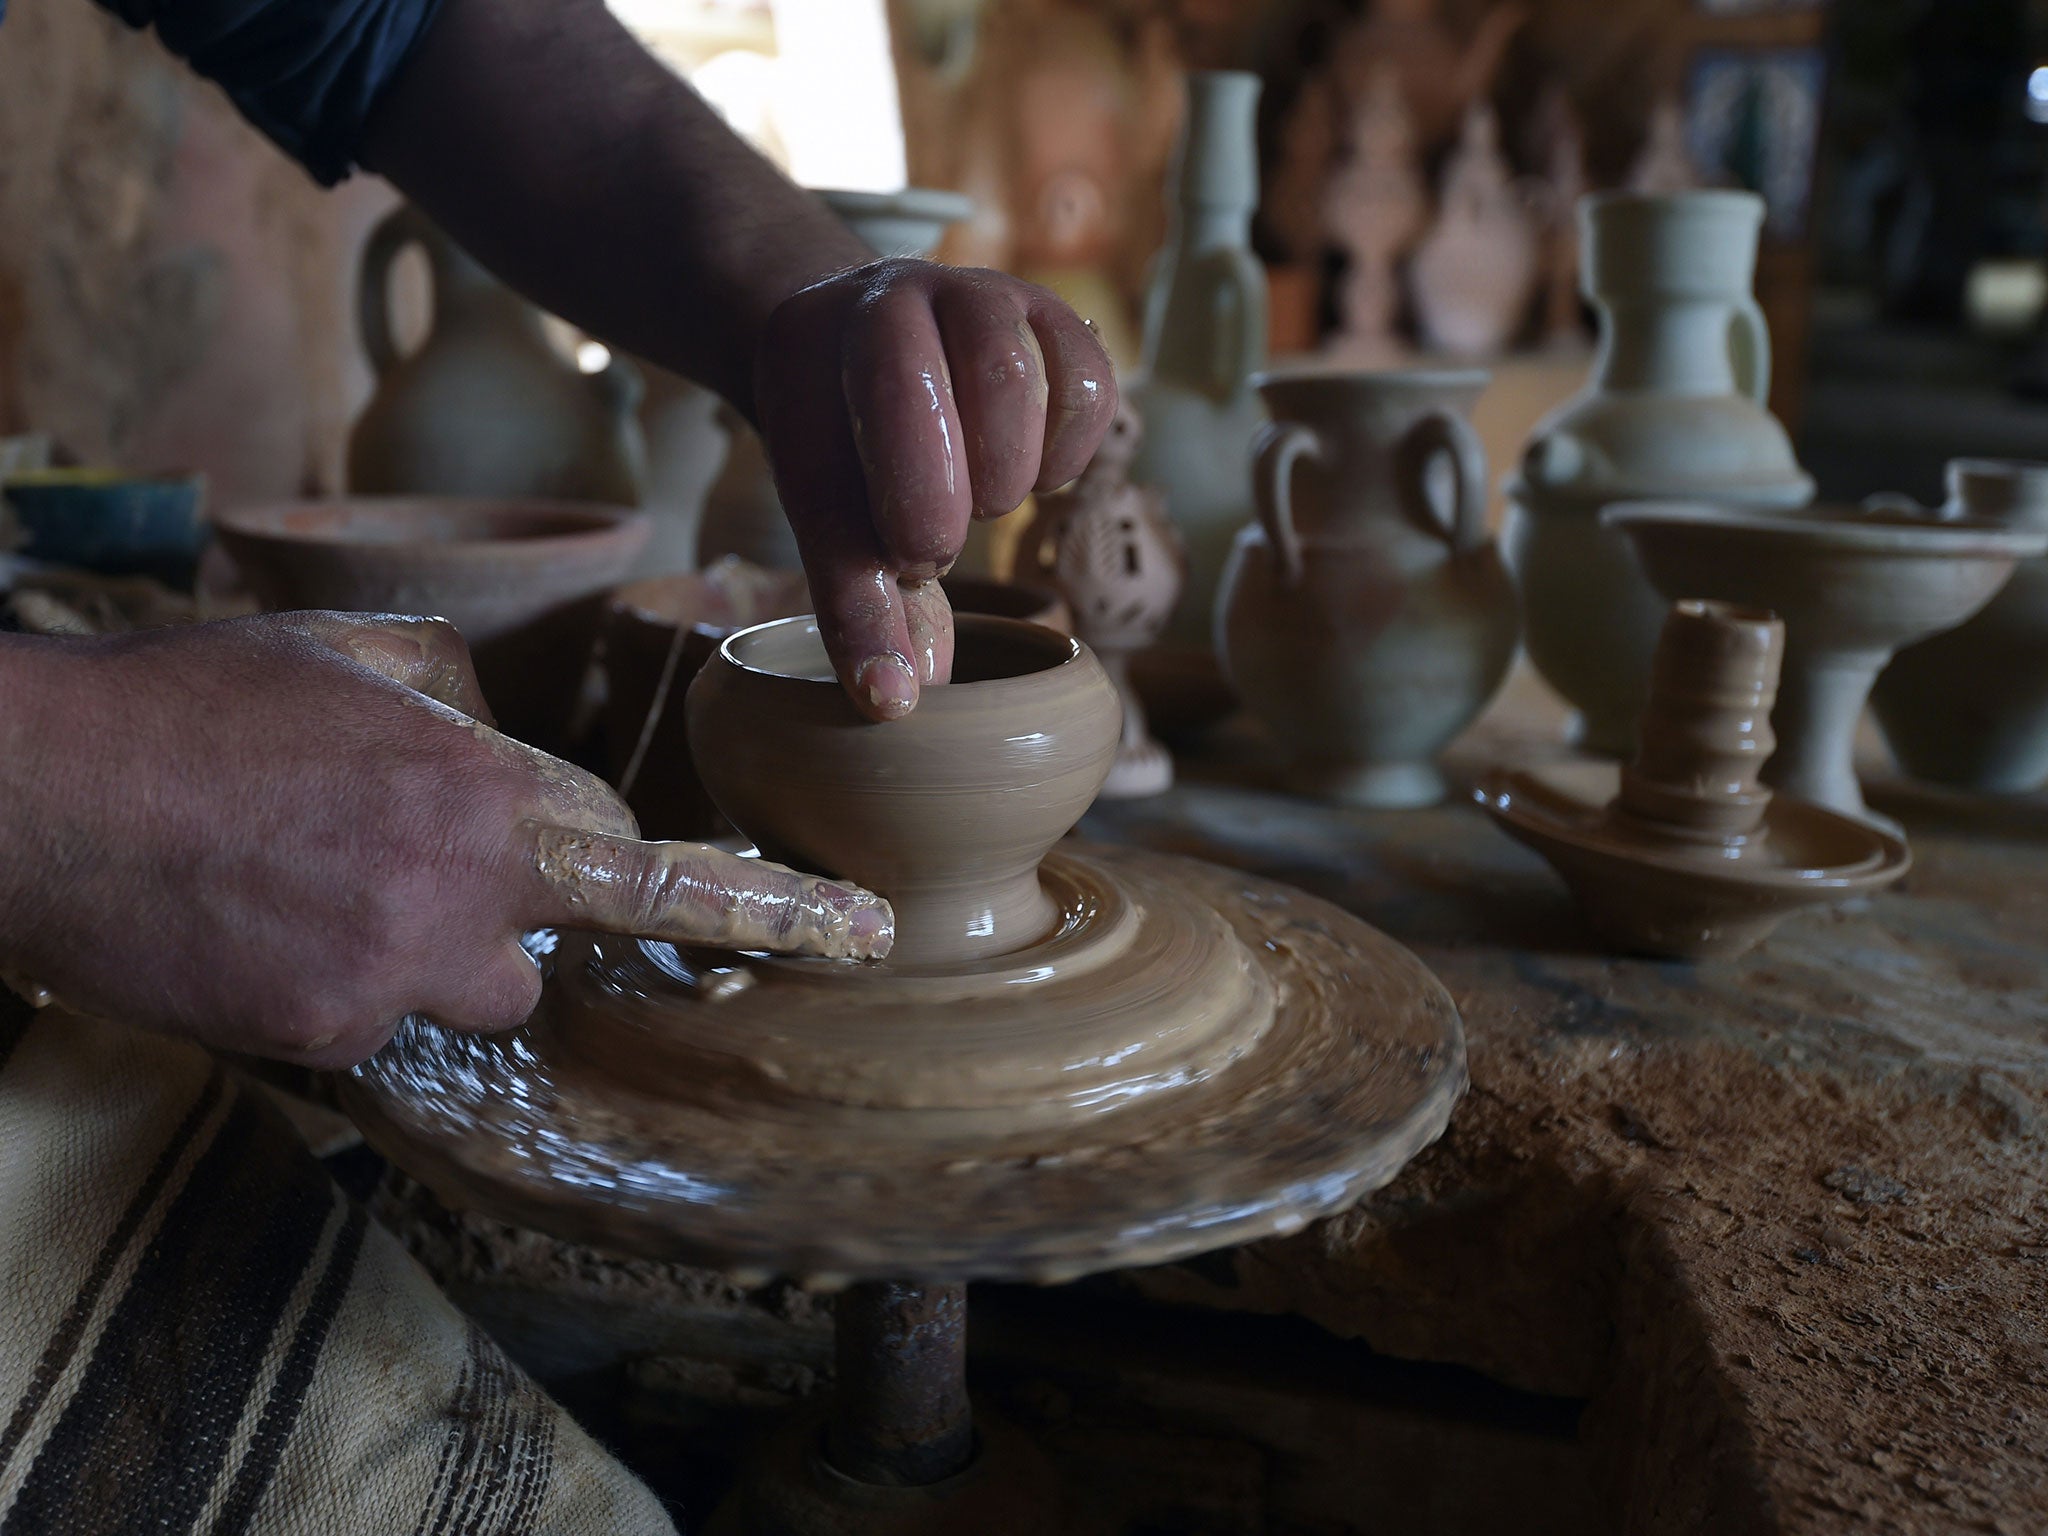 Talented potters are invited to apply for new BBC Two show Britain's Best Potter by 4 January